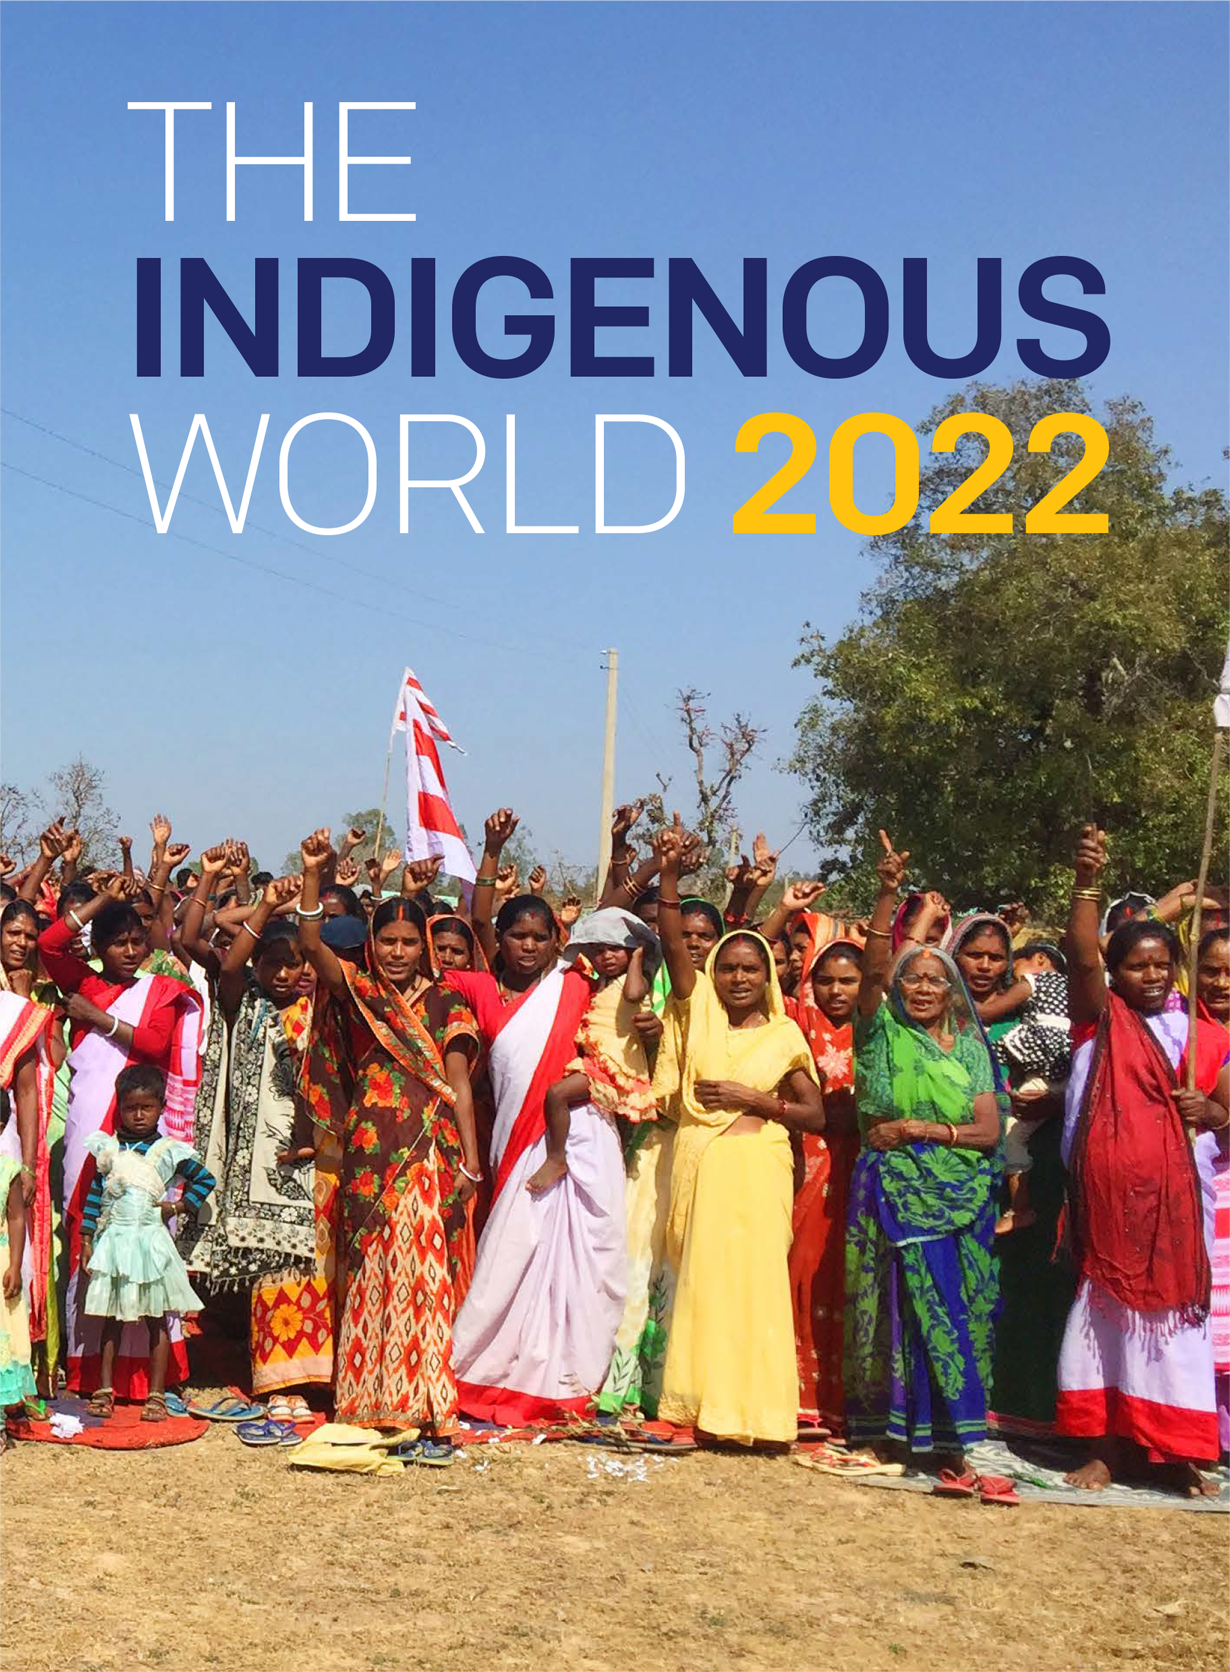 The Indigenous World 2022